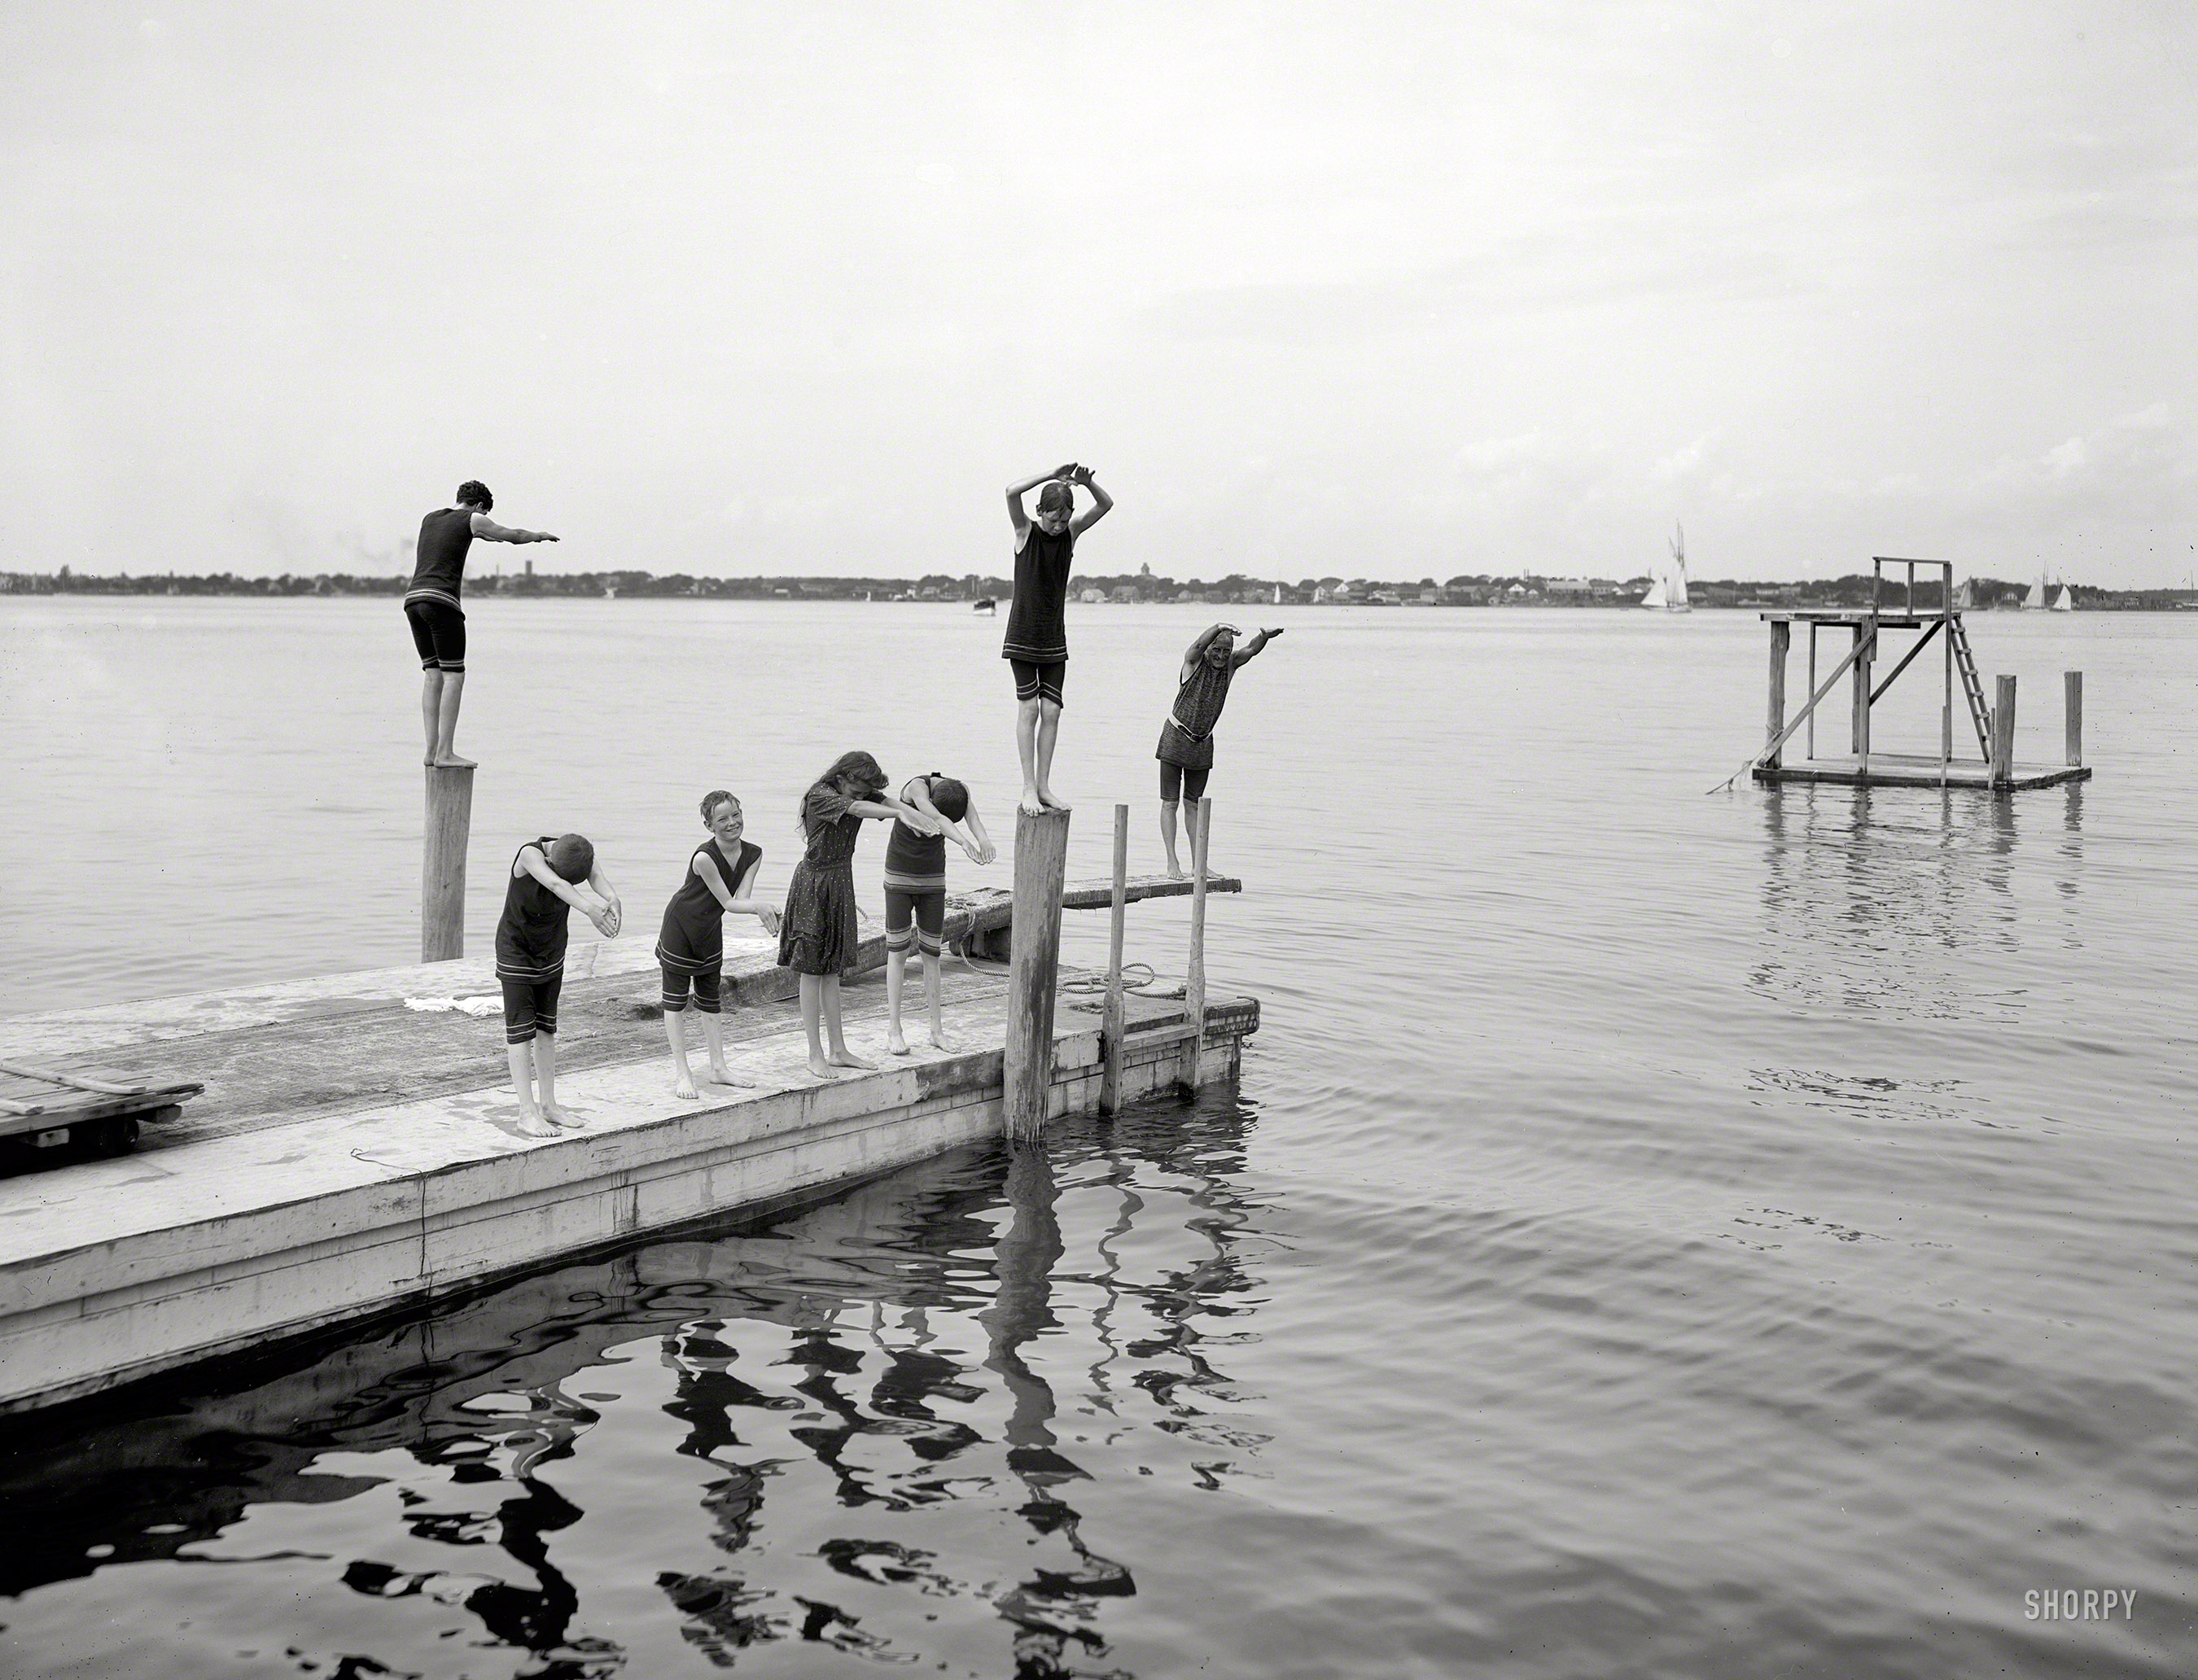 New York circa 1904. "Manhanset Manor. Bathing at Manhanset House, Shelter Island." Poised boys and a girl. 8x10 inch glass negative. View full size.